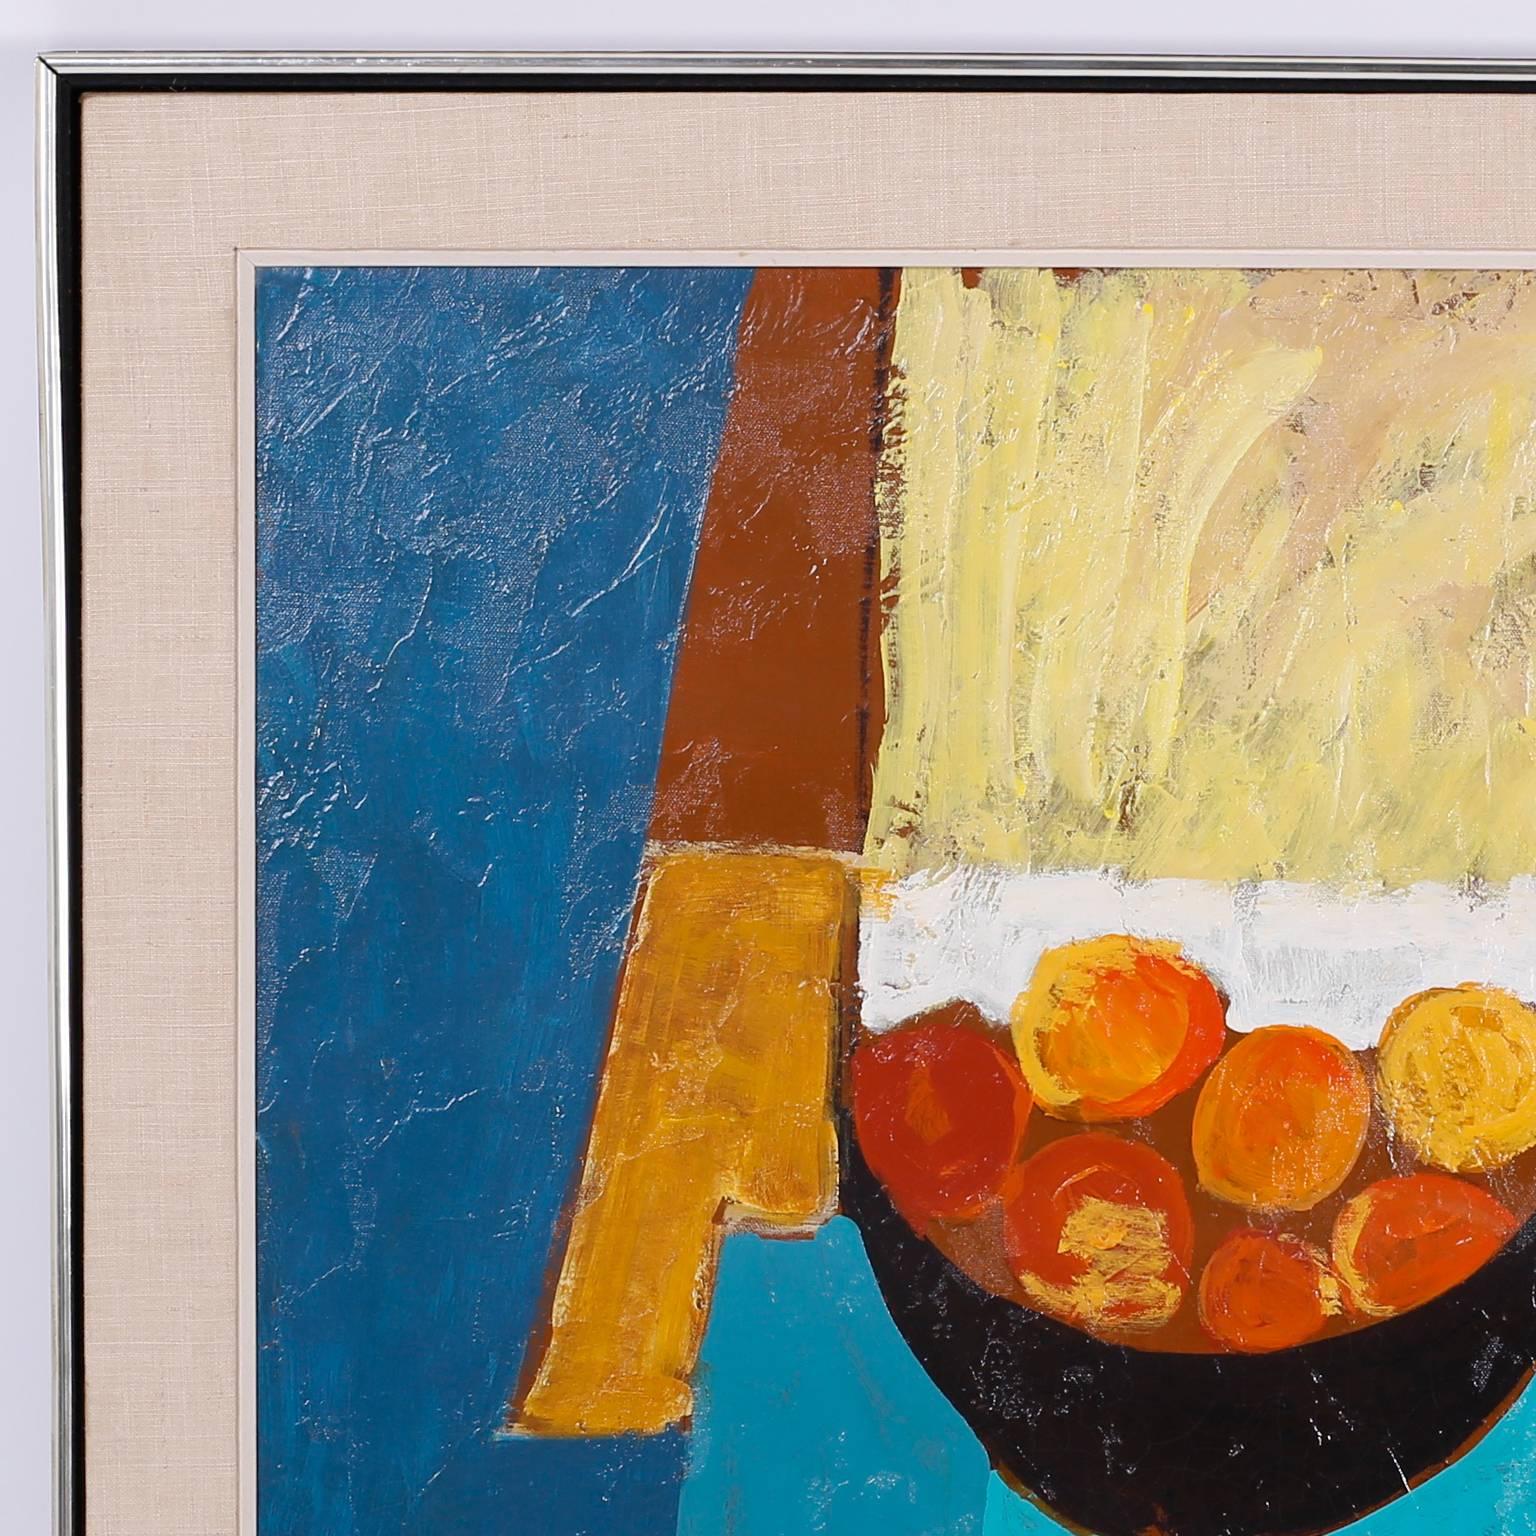 Midcentury oil painting on canvas with an adept use of bold colors and a joyous spirit. The Classic still life genre re-invented over century is well represented here as a modernist contribution. Signed Foy in the lower right.